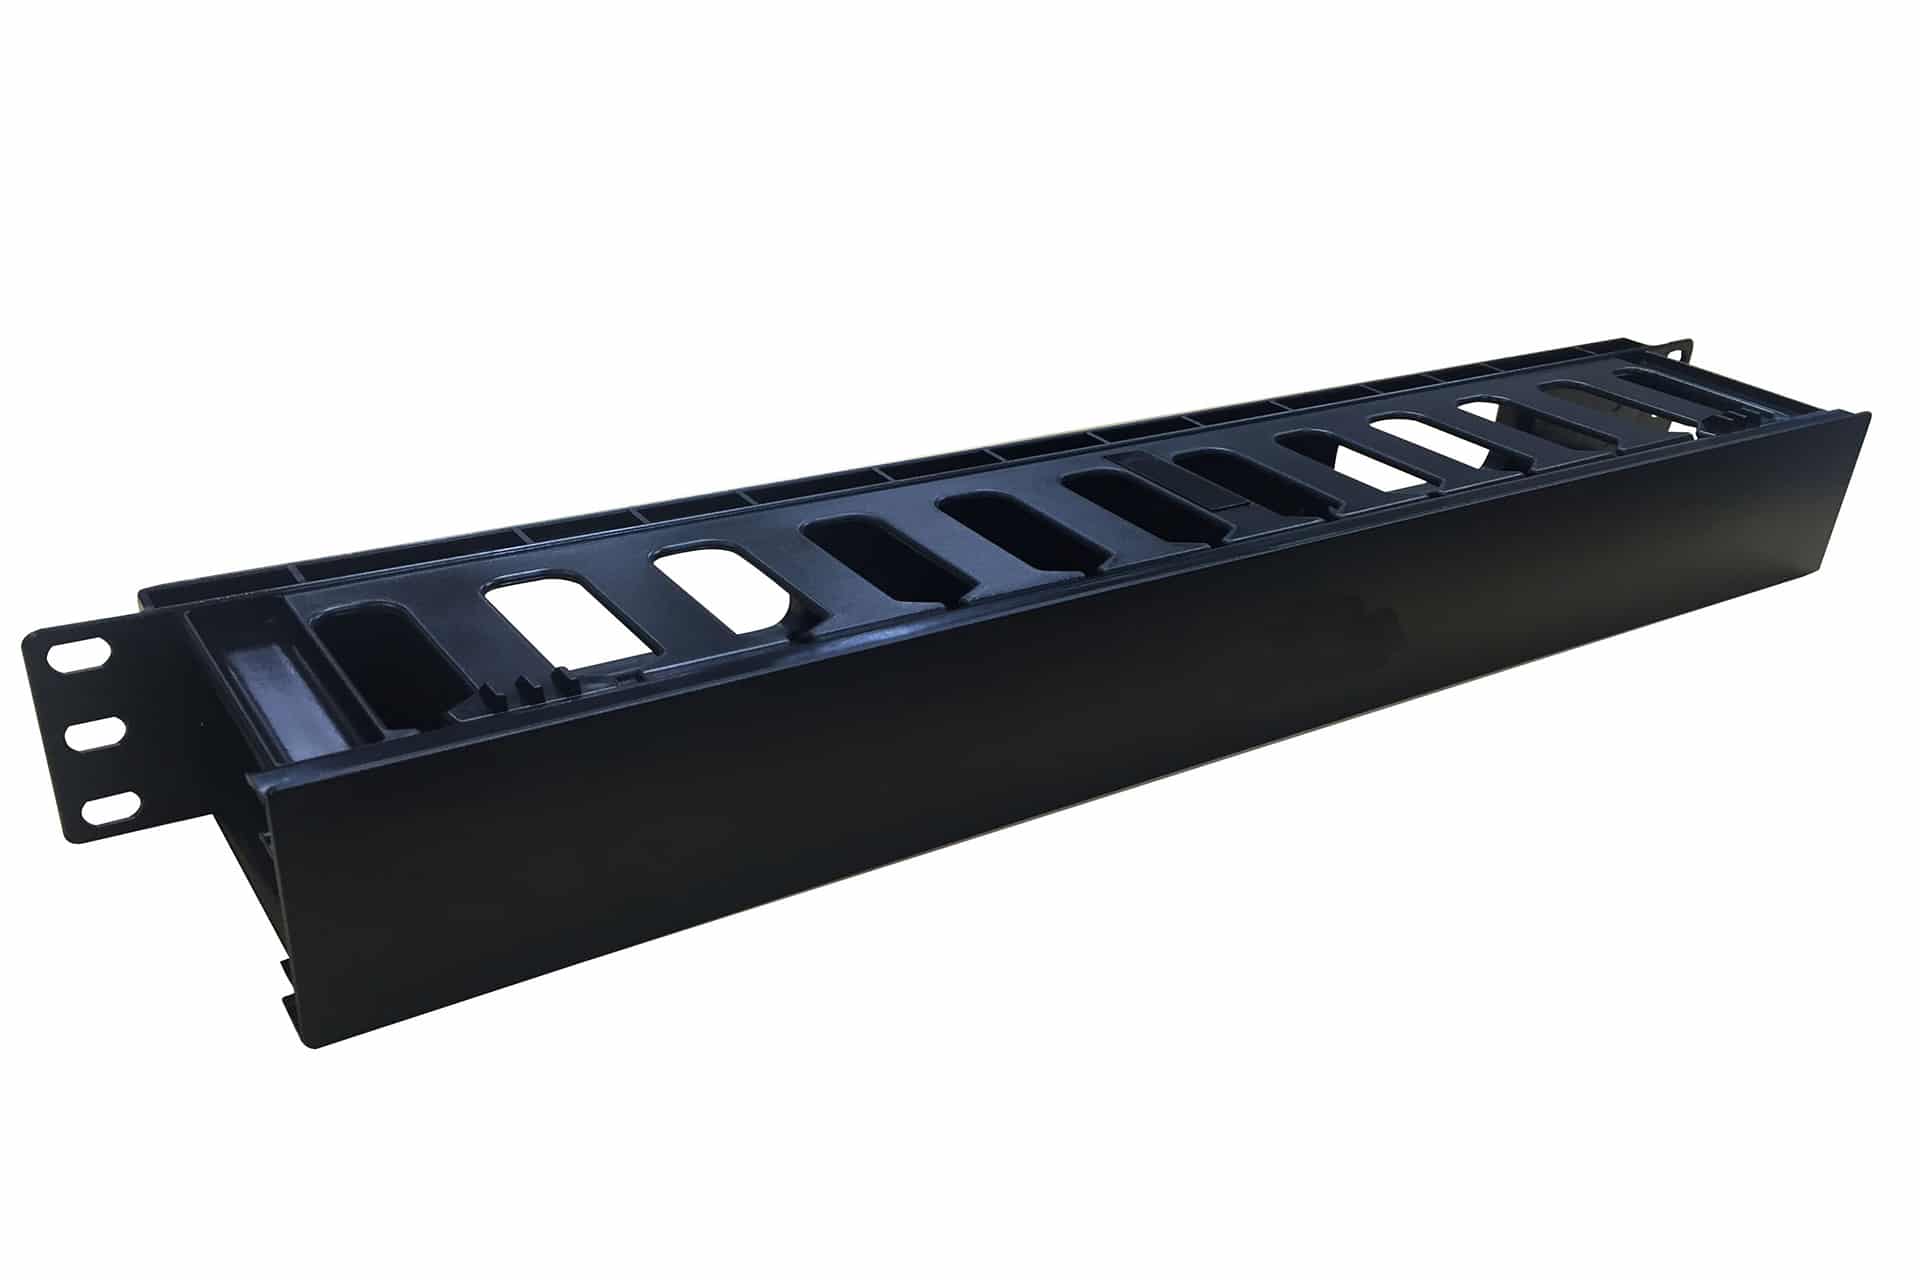 https://www.aflhyperscale.com/wp-content/uploads/2020/06/1U-Black-Cable-Bar-with-12-Slots-and-Plastic-Cover-1.jpg